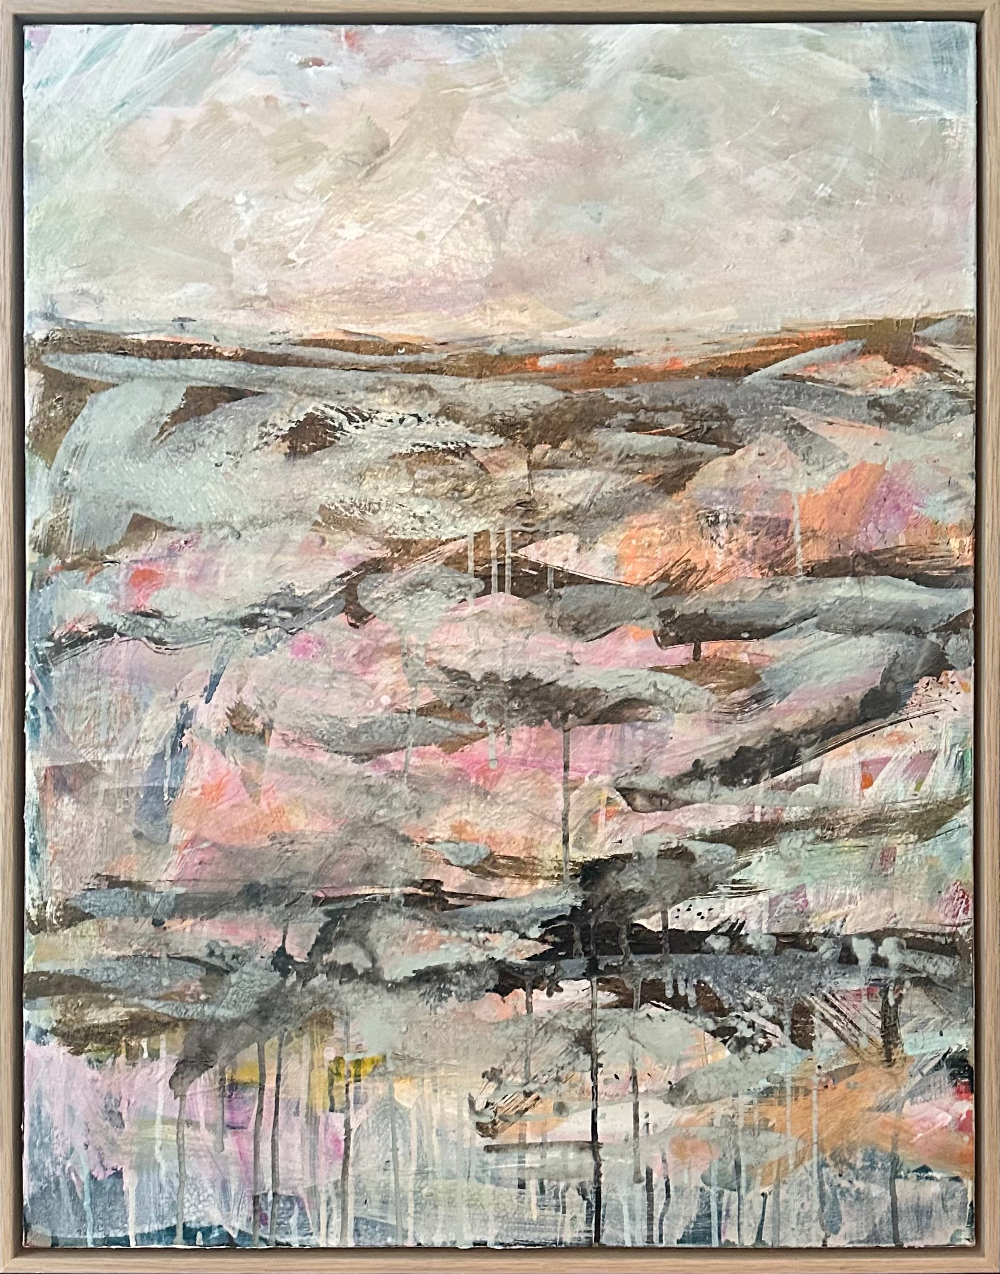 Beautiful Journey Mixed Media on Canvas by Jody Hope Gibbons